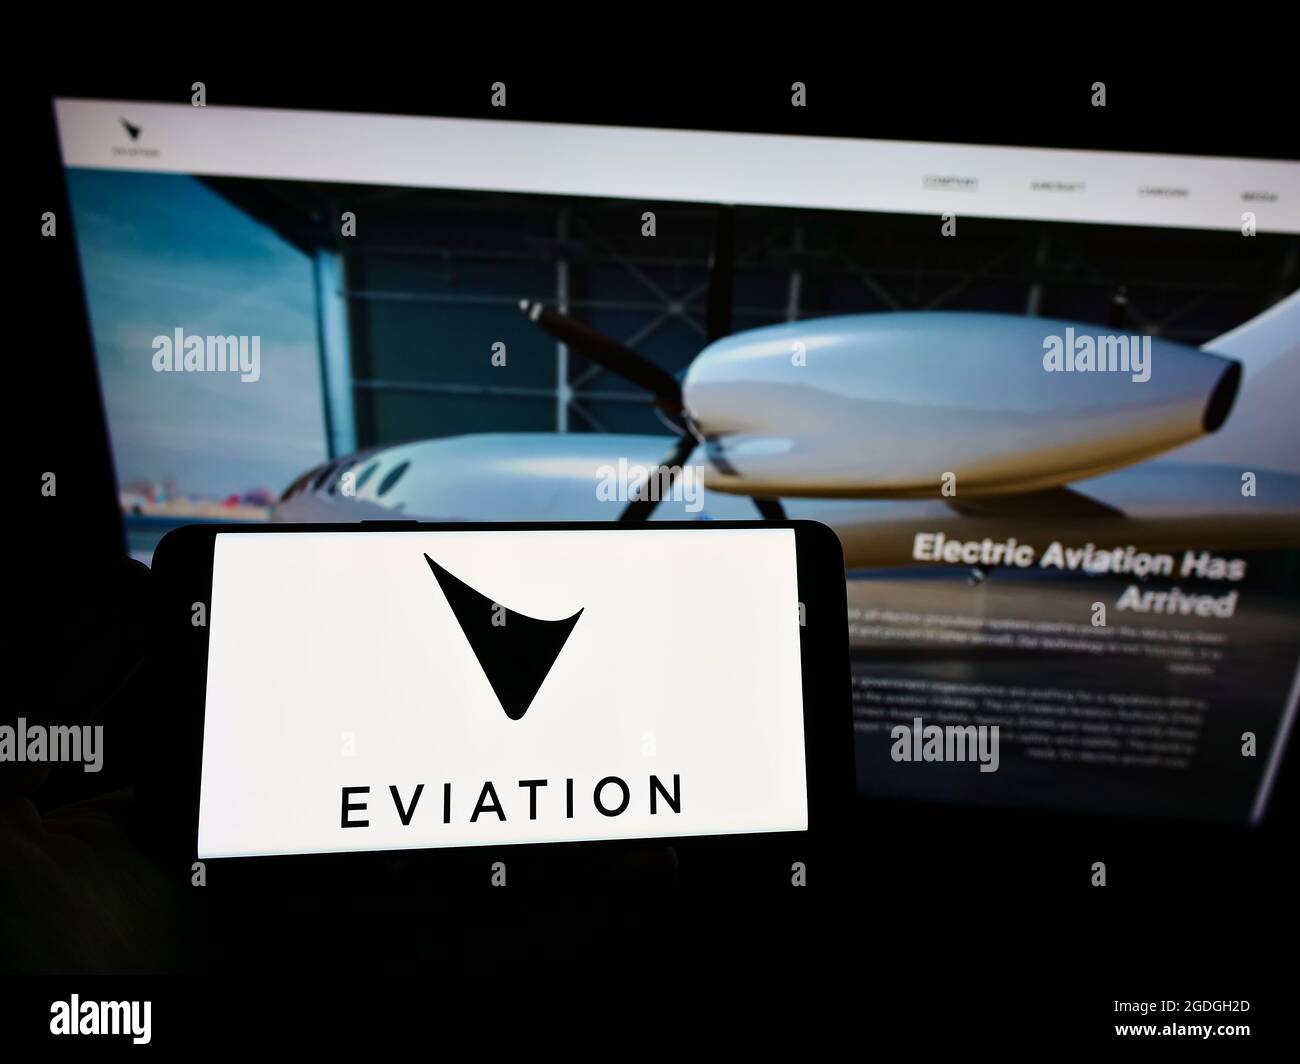 Person holding smartphone with logo of electric aircraft company Eviation Aircraft Ltd. on screen in front of website. Focus on phone display. Stock Photo